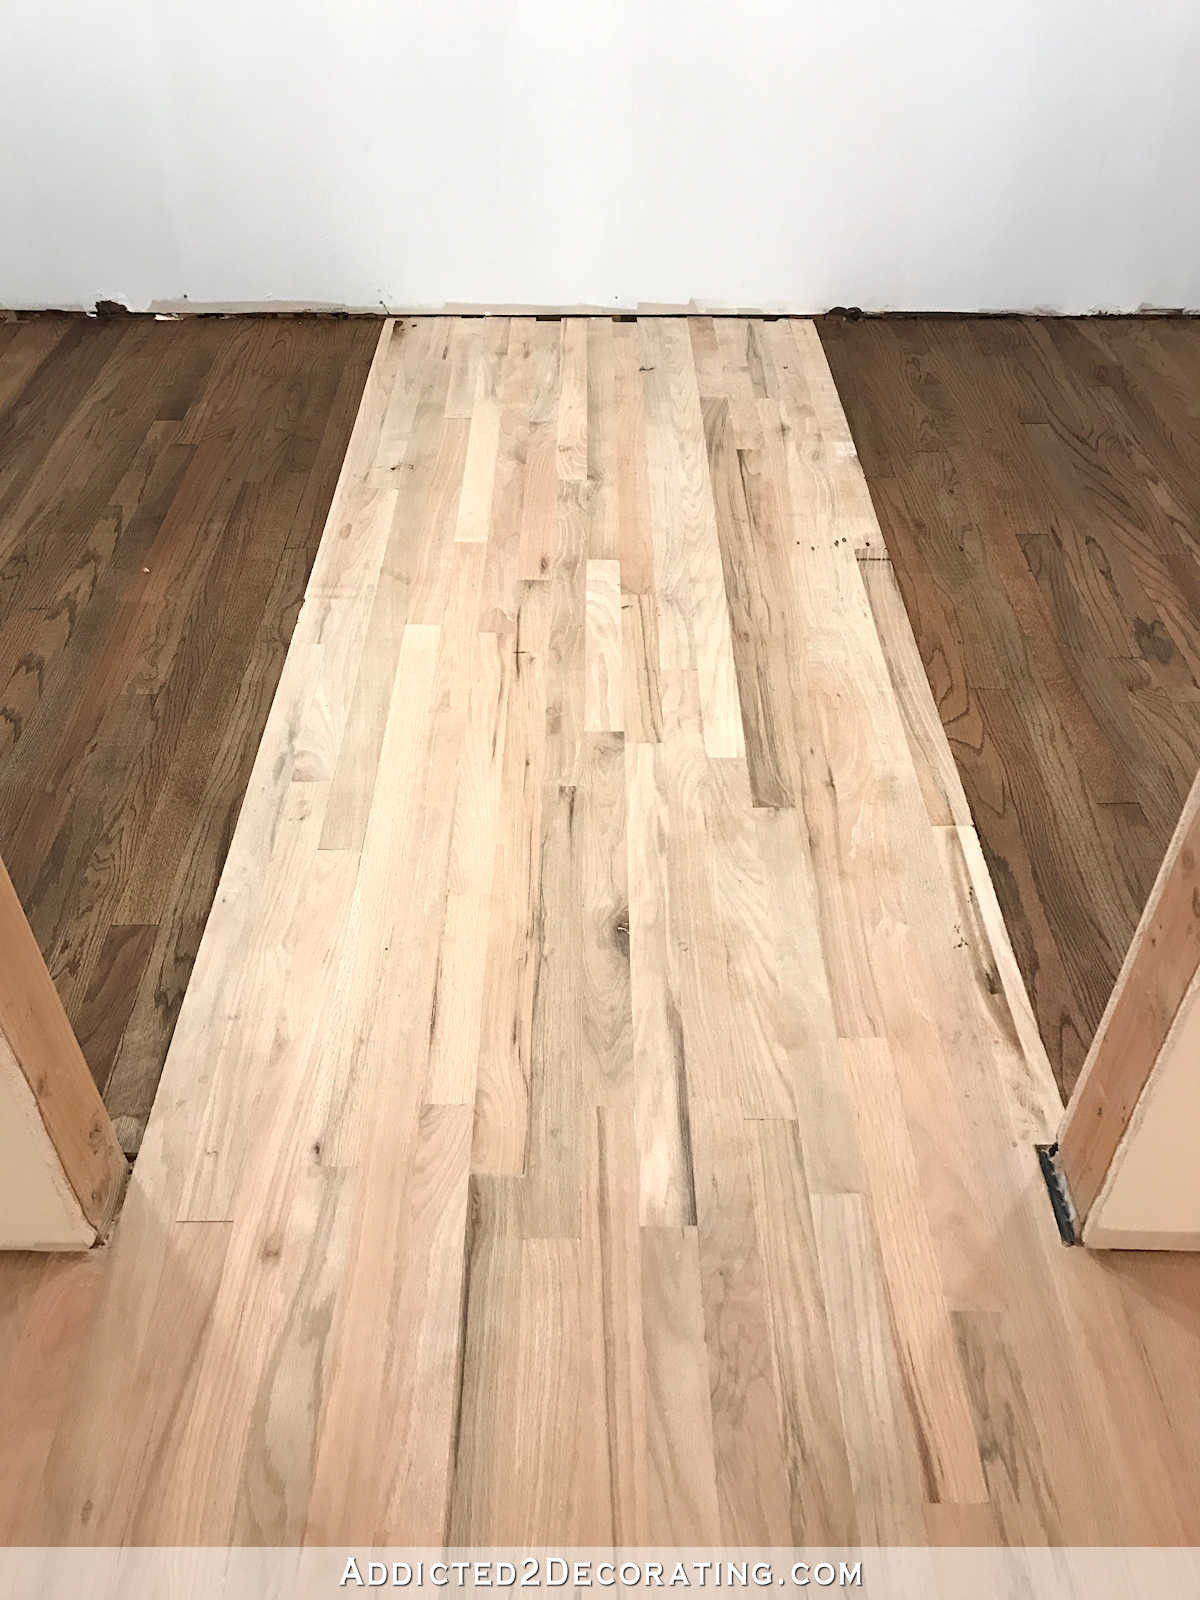 Hardwood Flooring 2017 Trends Of Adventures In Staining My Red Oak Hardwood Floors Products Process Regarding Staining Red Oak Hardwood Floors 11 Stain On Left and Right Sides Of the